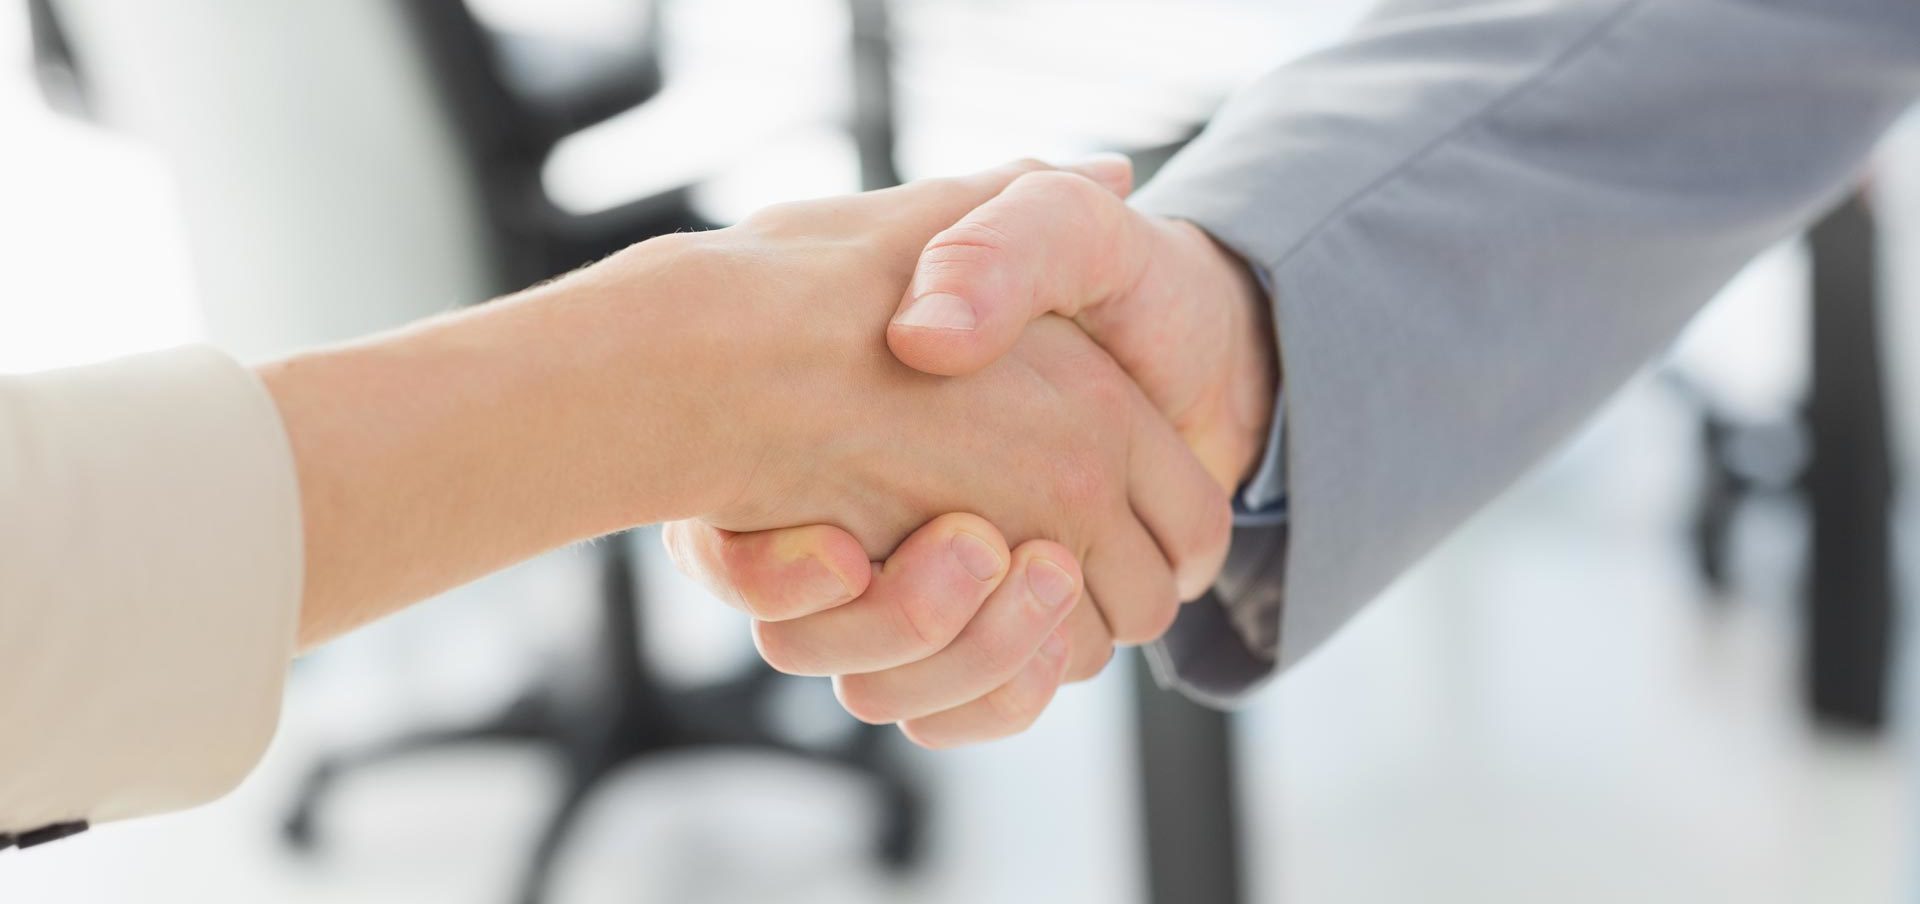 Two business people shaking hands